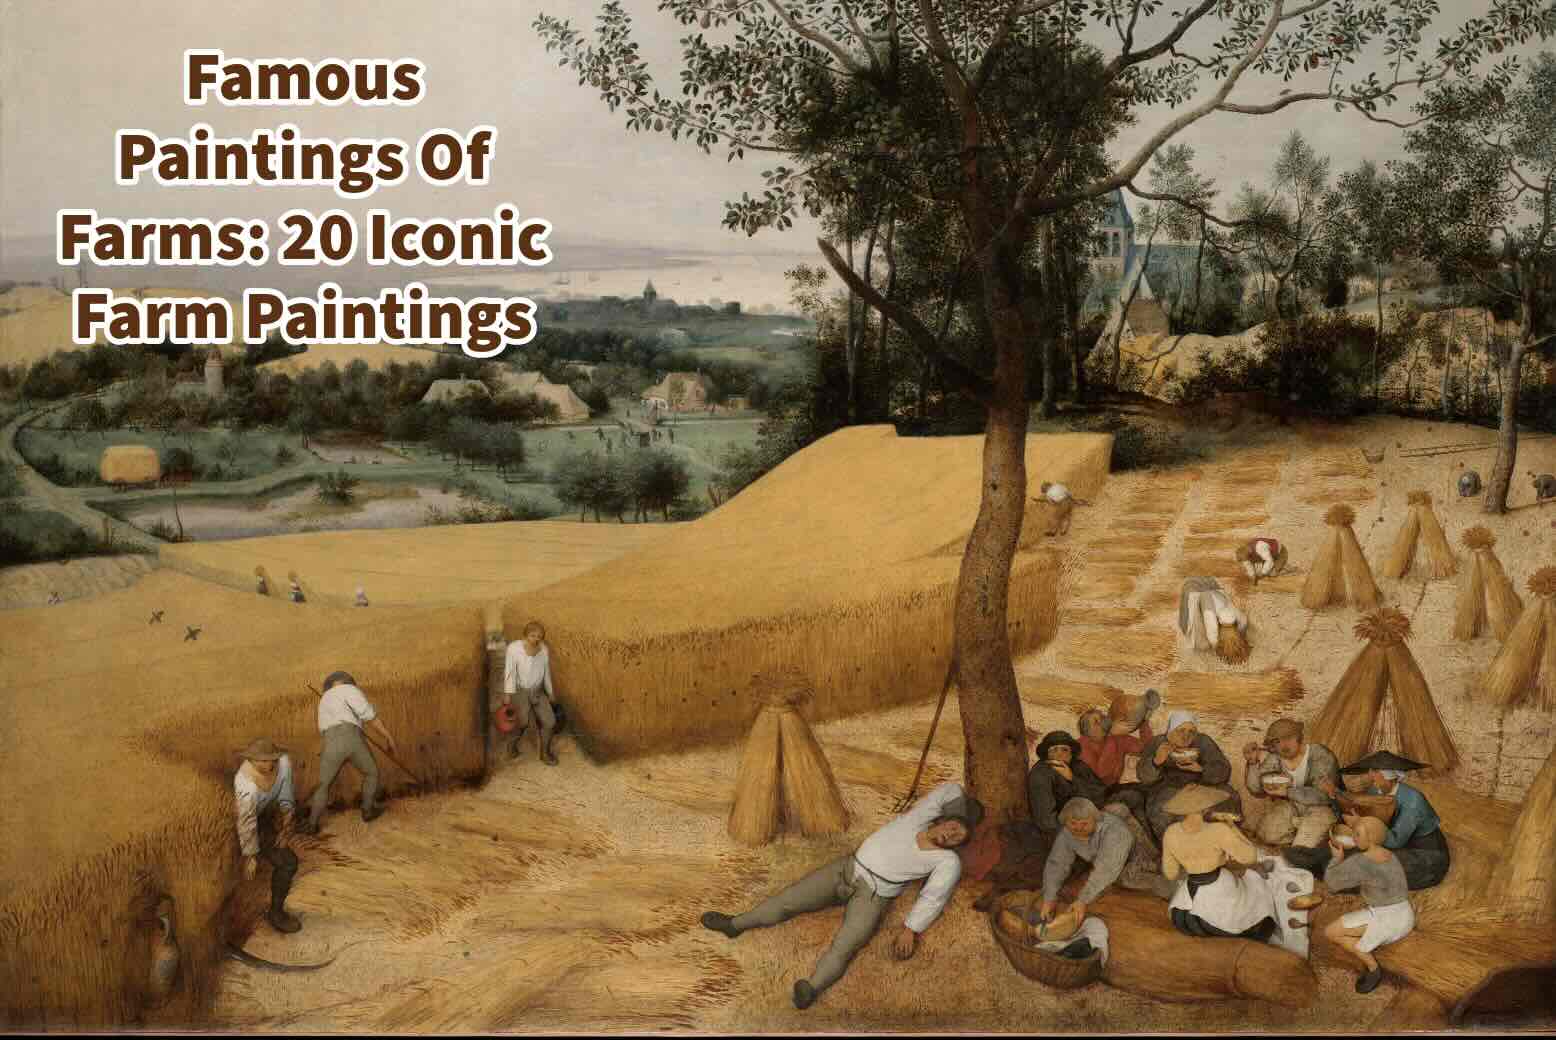 Famous Paintings Of Farms: 20 Iconic Farm Paintings